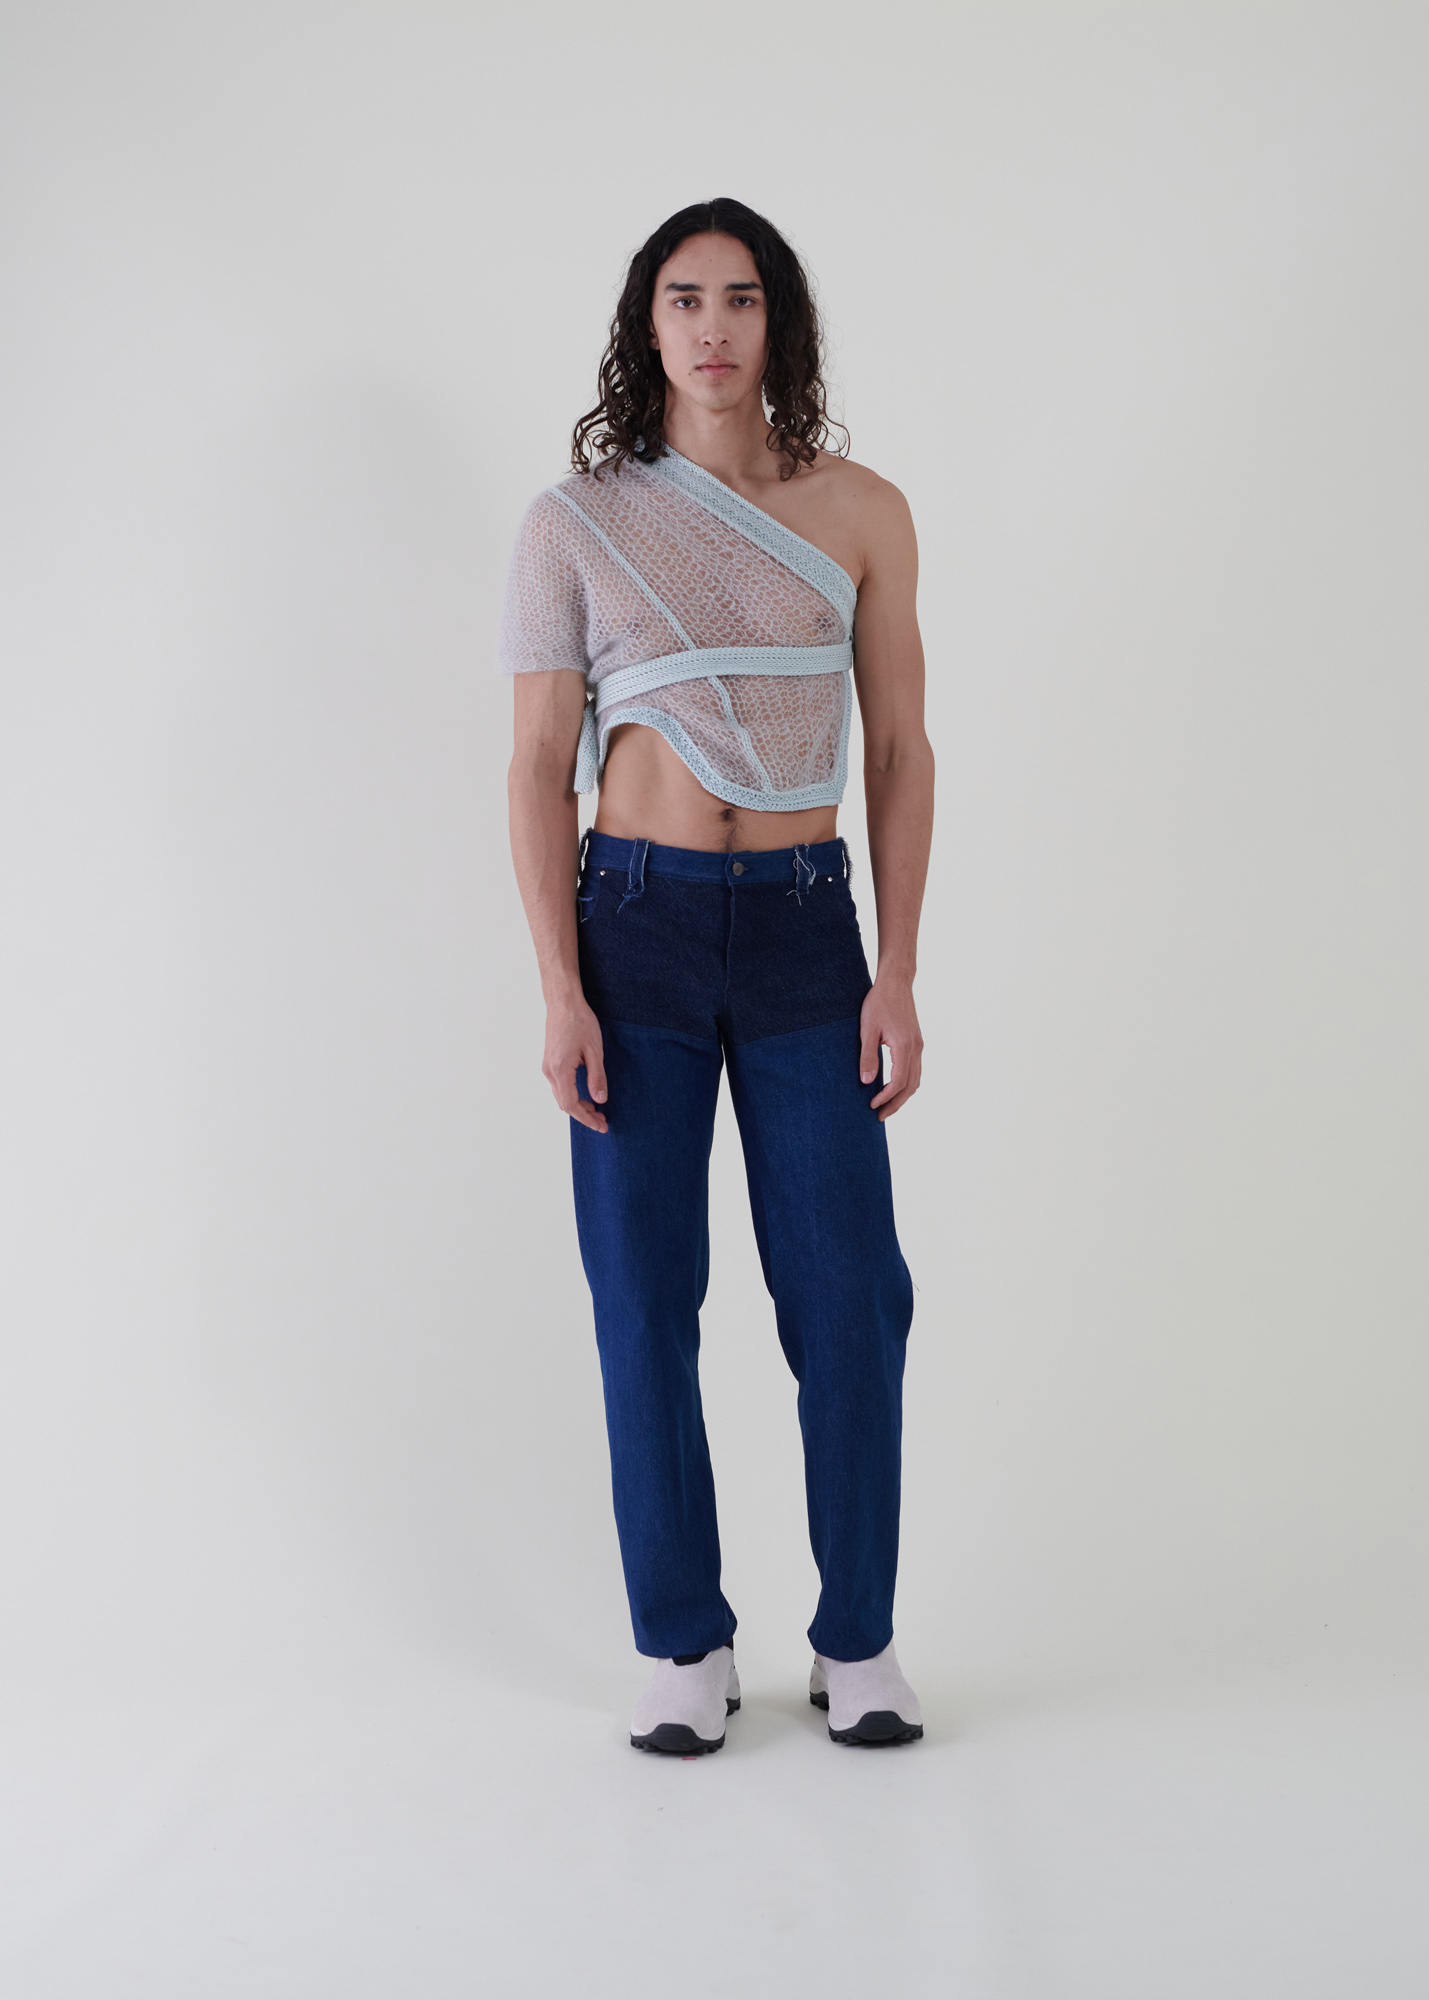 Sustainable fashion with upcycled raw denim from Aldwin Teva William